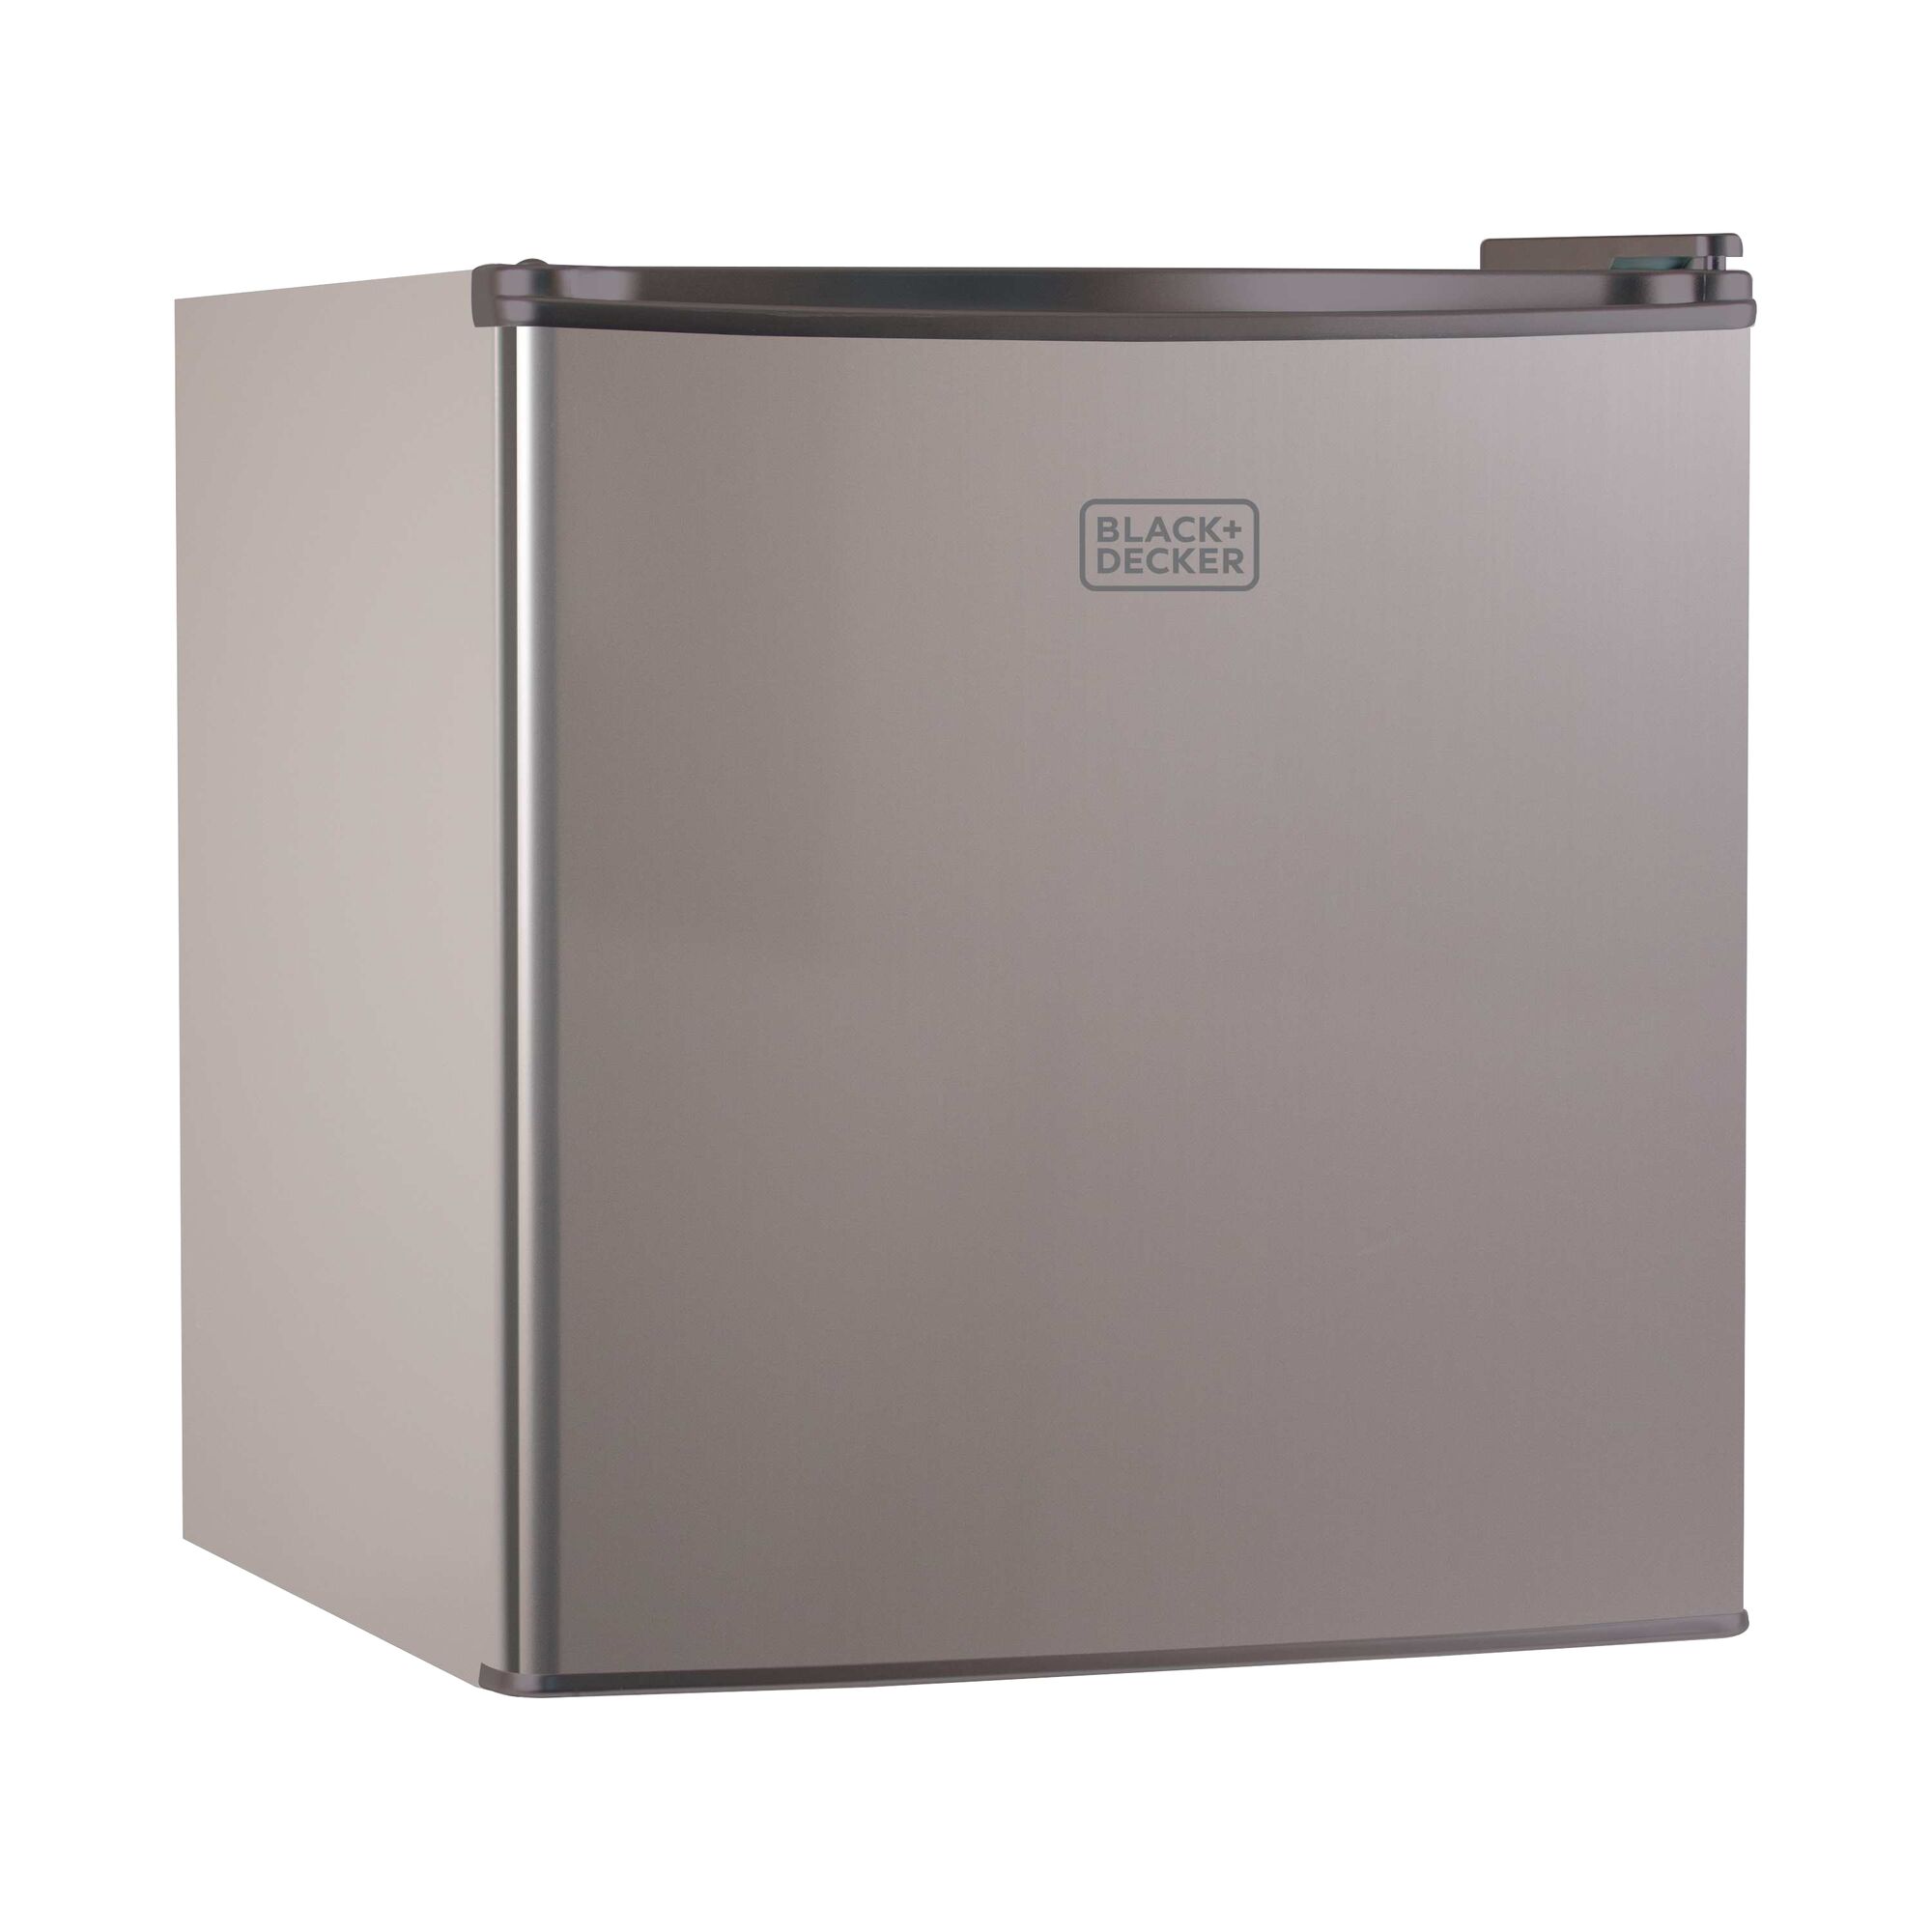 Profile of 1 and half cubic foot Energy Star Refrigerator with Freezer.